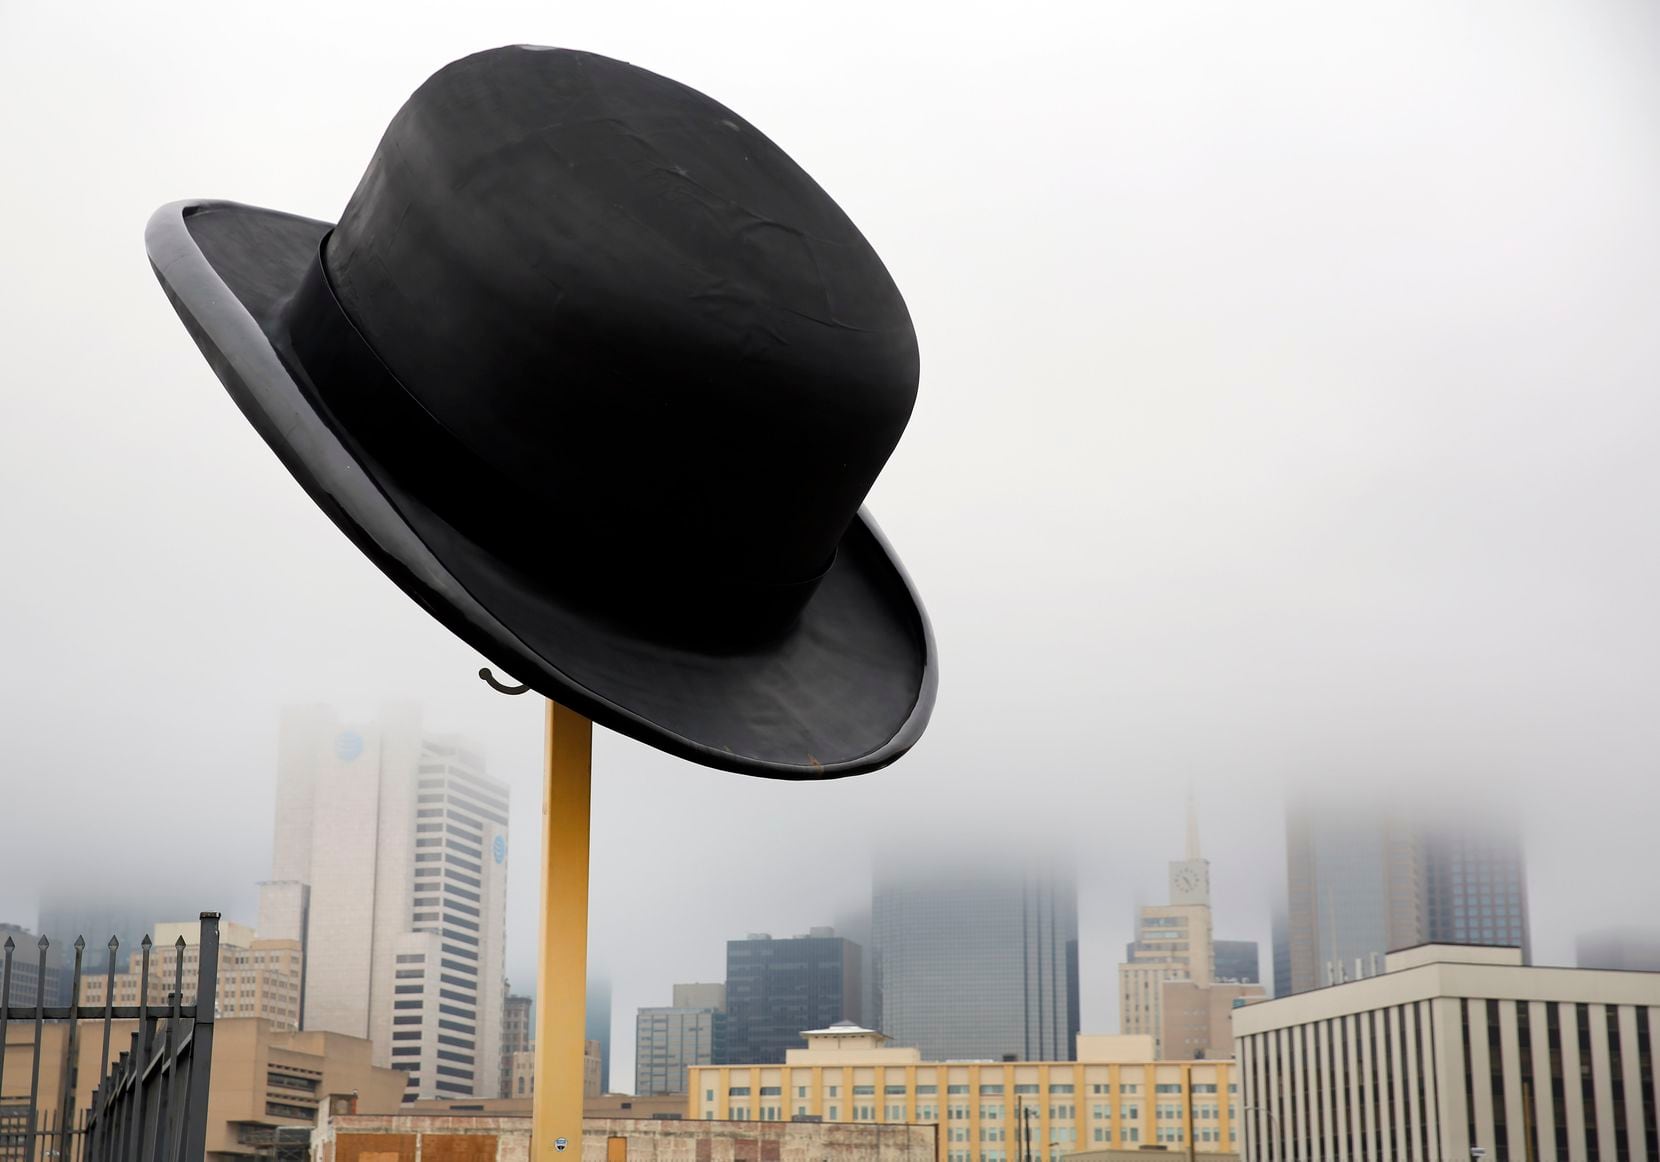 Look for the 10-foot-tall, 20-foot-wide, 2-ton bowler hat created by artist Keith Turman in...